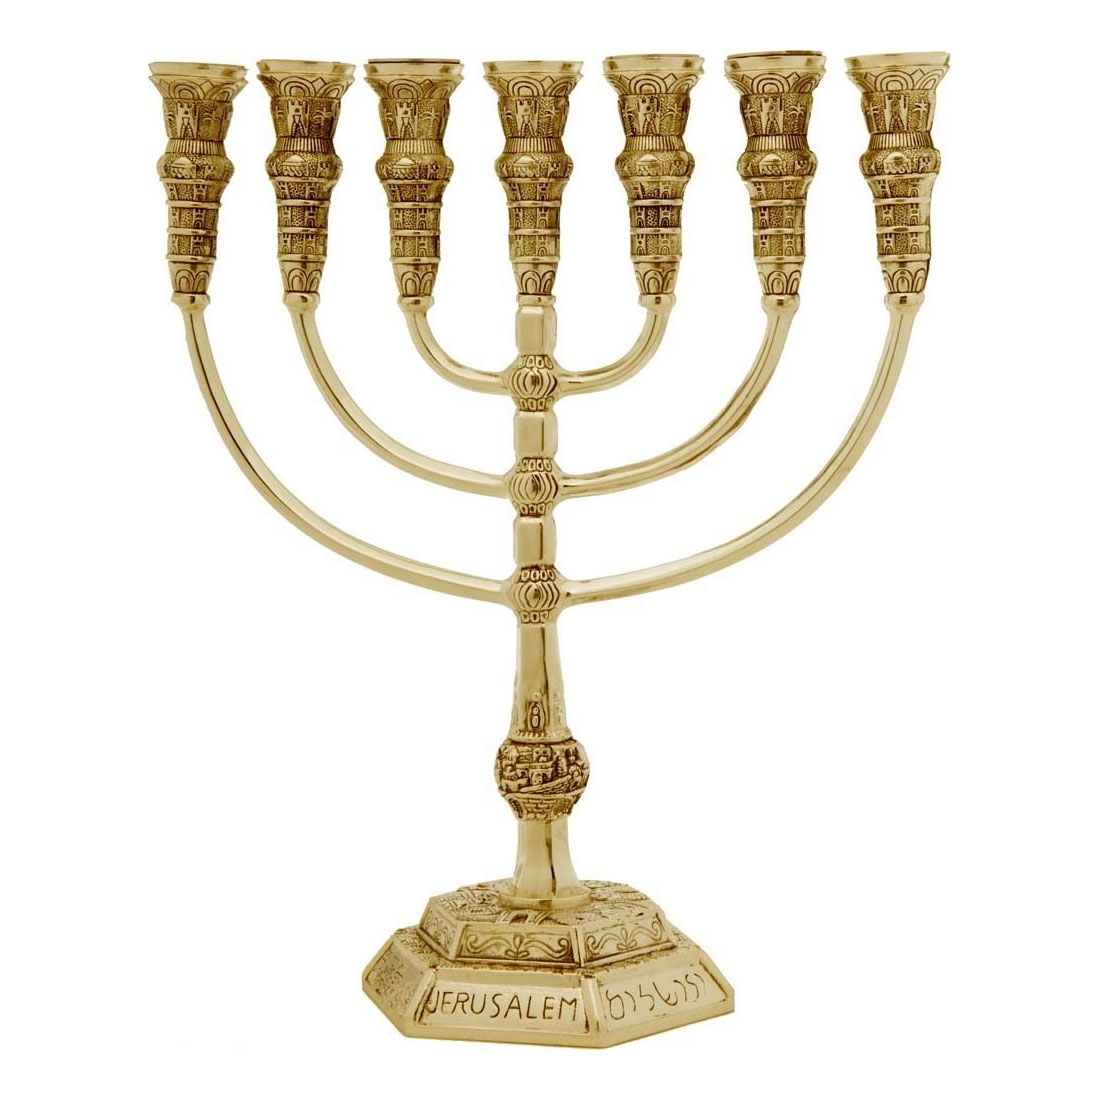 Gold-Plated Jerusalem Temple 7-Branched Menorah - 1